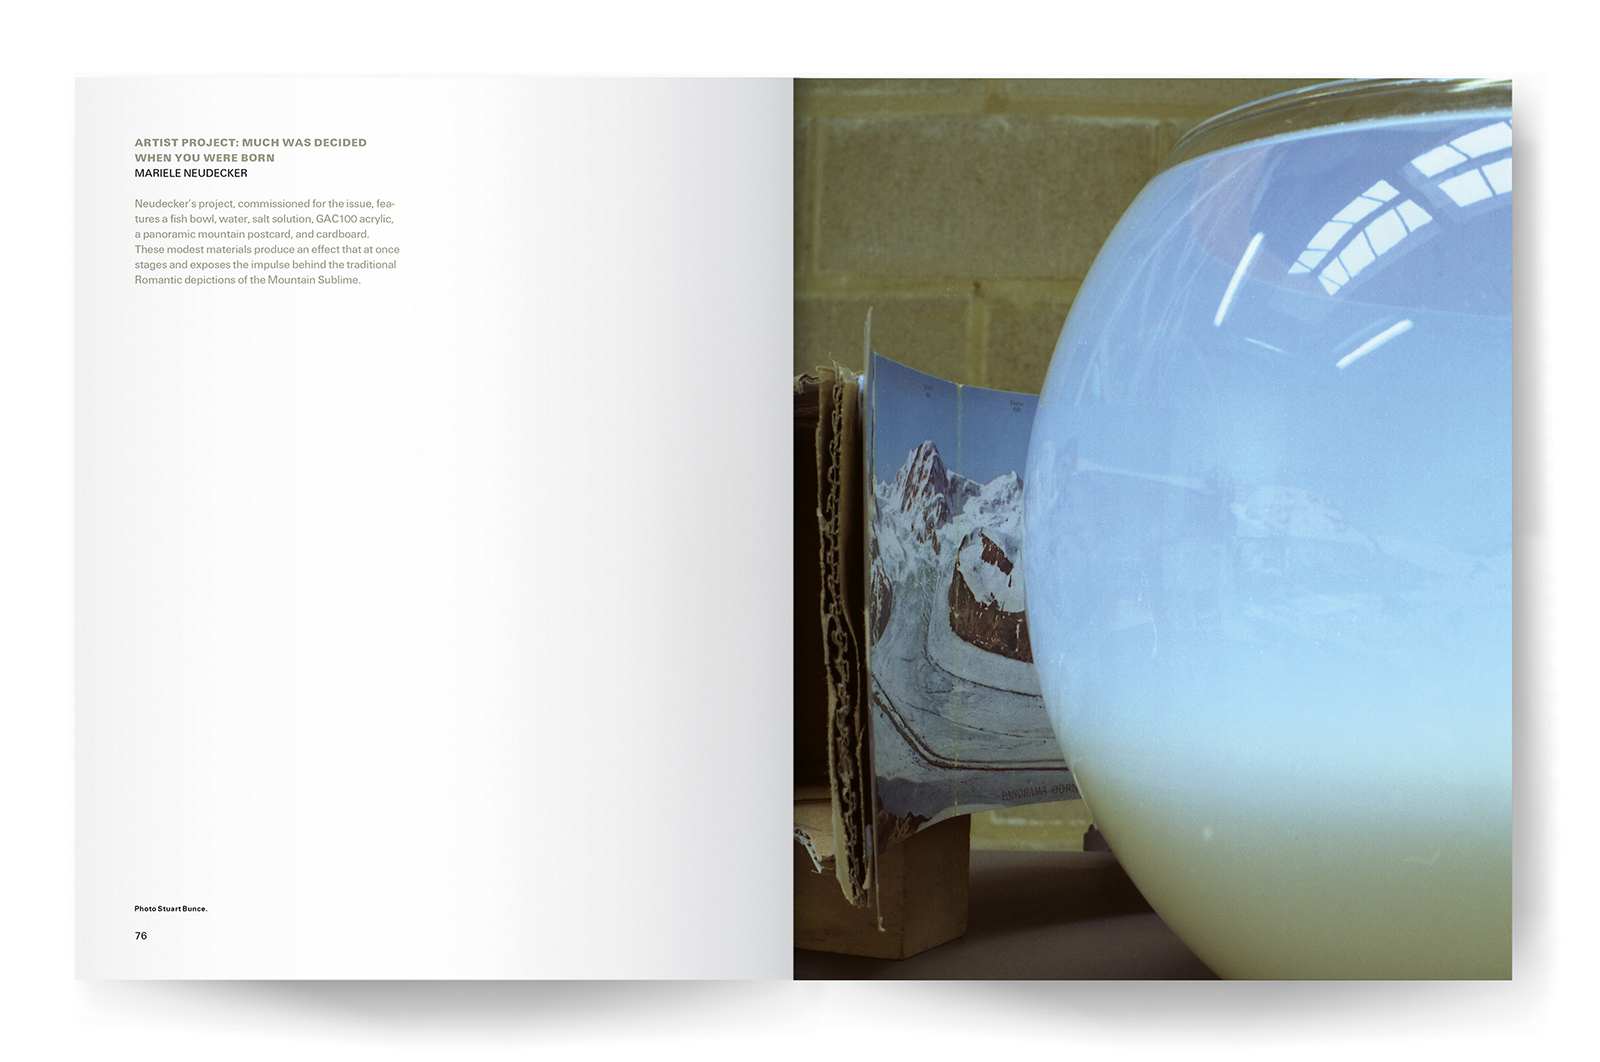 An image of the first and second page of Mariele Neudecker’s project as it appeared in the magazine.